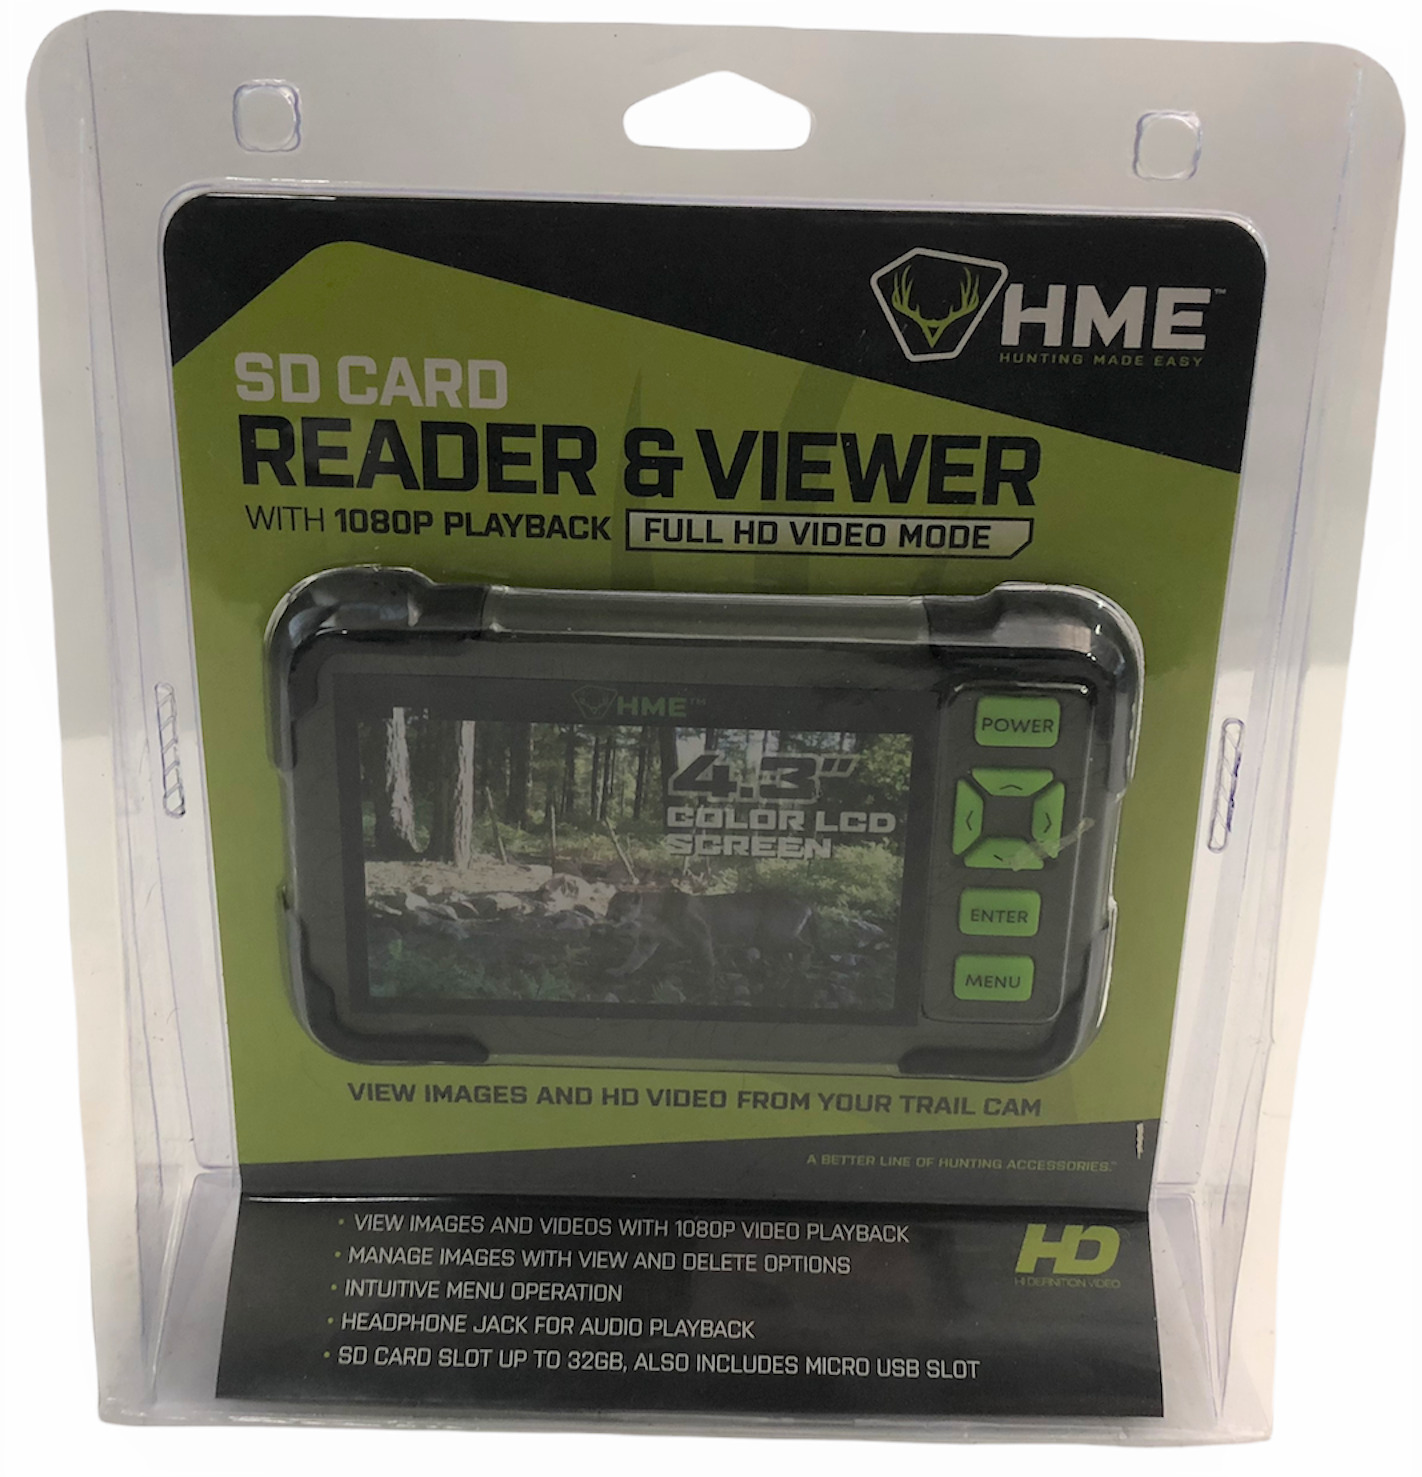 HME SD Card Reader & Viewer with 1080P Playback Full HD Video Mode - HME-CRV43HD